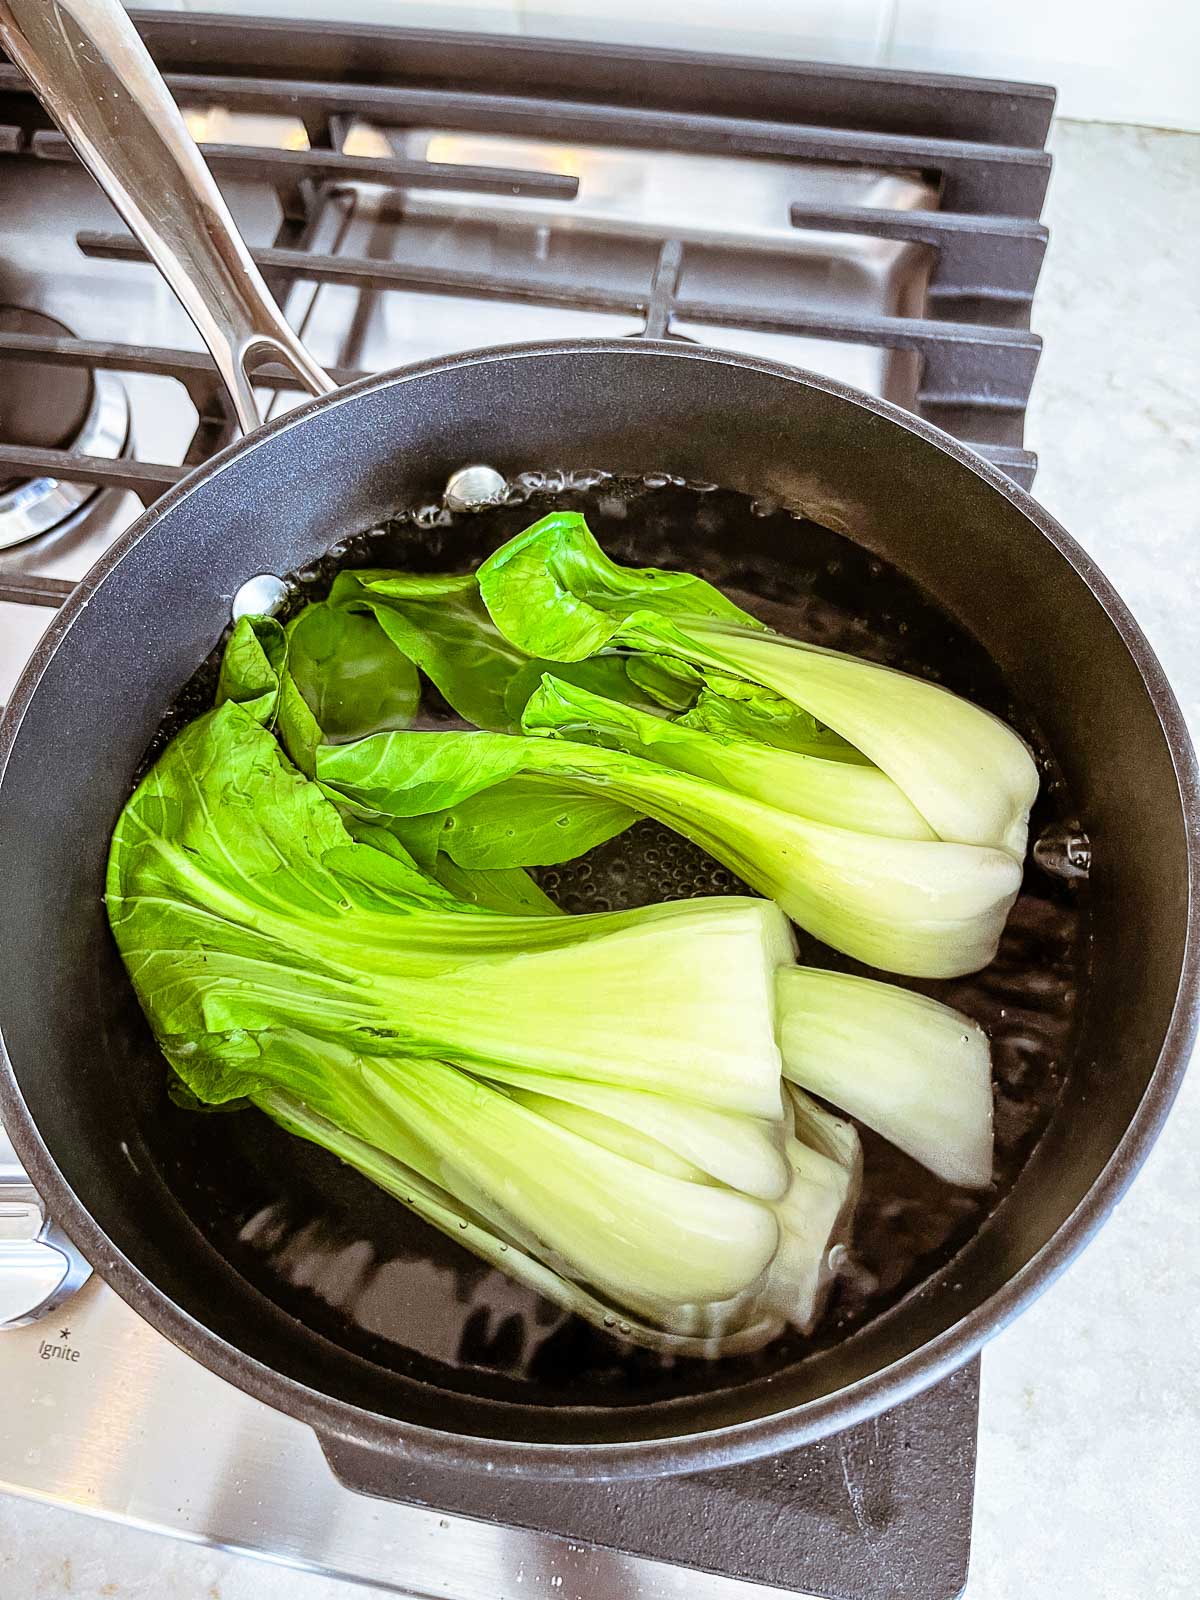 Baby bok choy boiling in water in a pot on the stove.